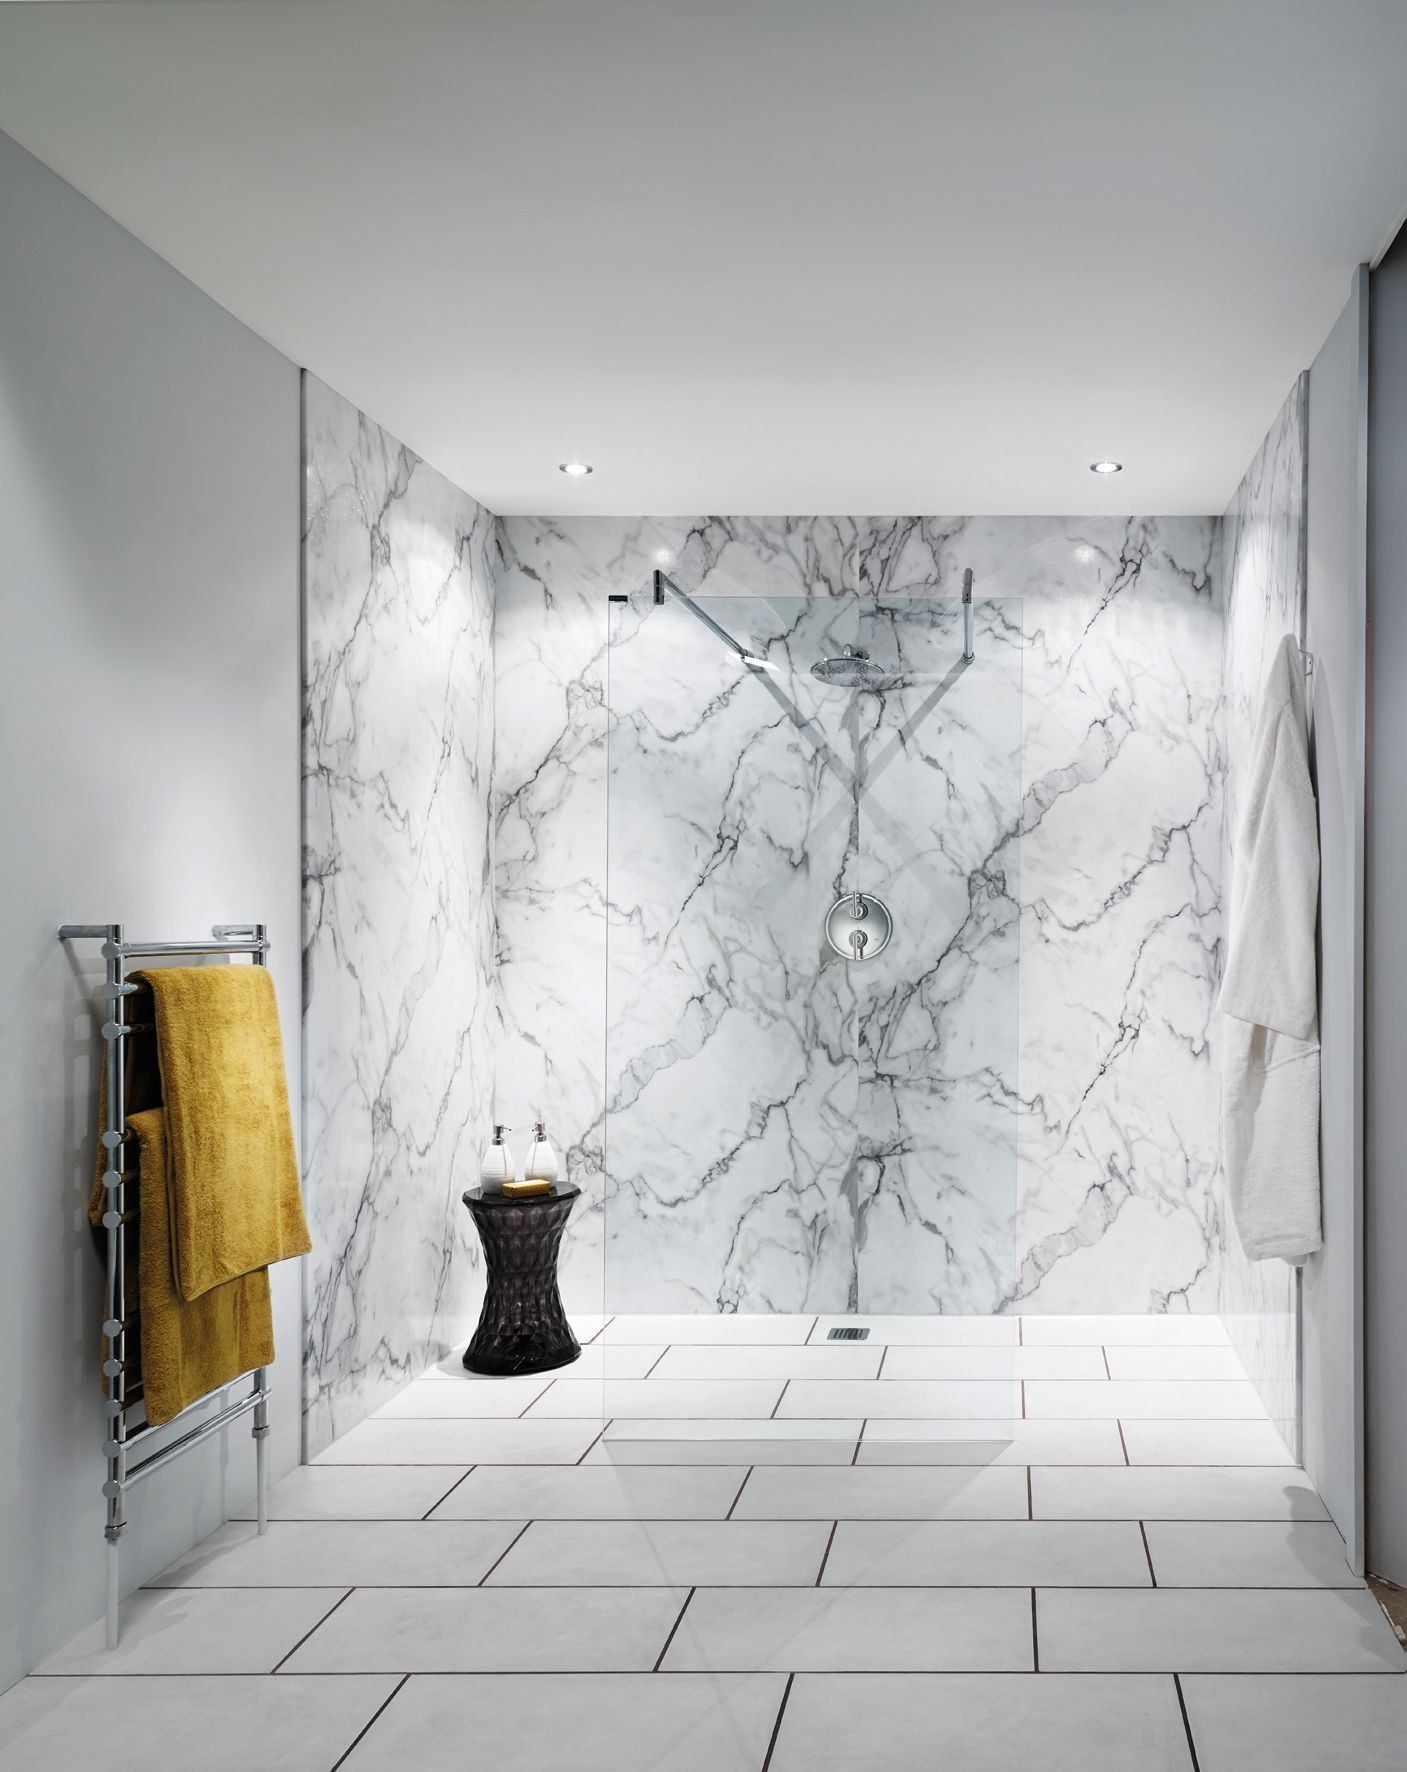 Bathroom Shower Wall Panels
 Alternatives to Tiling Your Bathrooms Waterproof